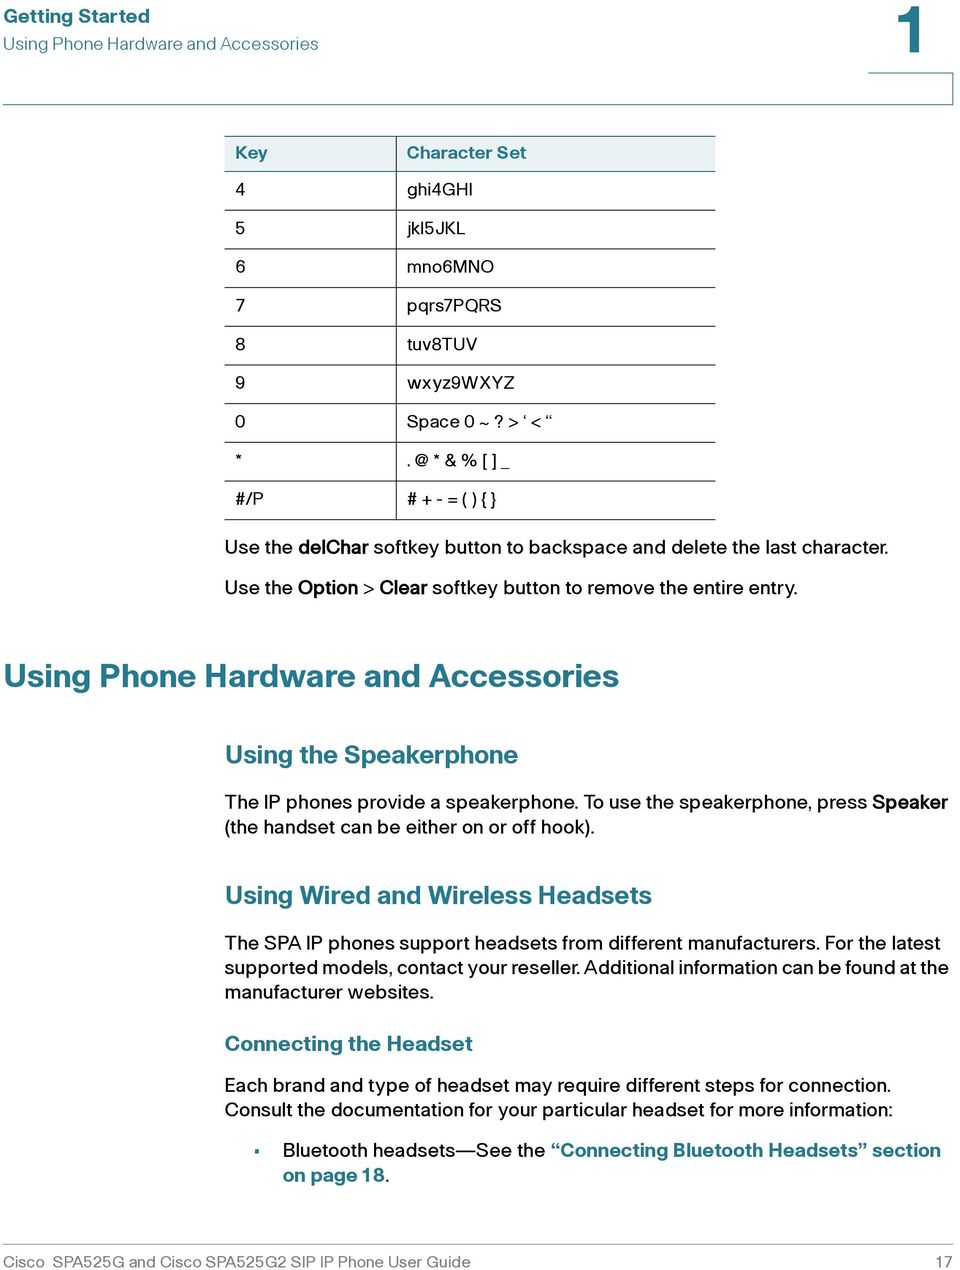 Using Phone Hardware and Accessories Using the Speakerphone The IP phones provide a speakerphone. To use the speakerphone, press Speaker (the handset can be either on or off hook).